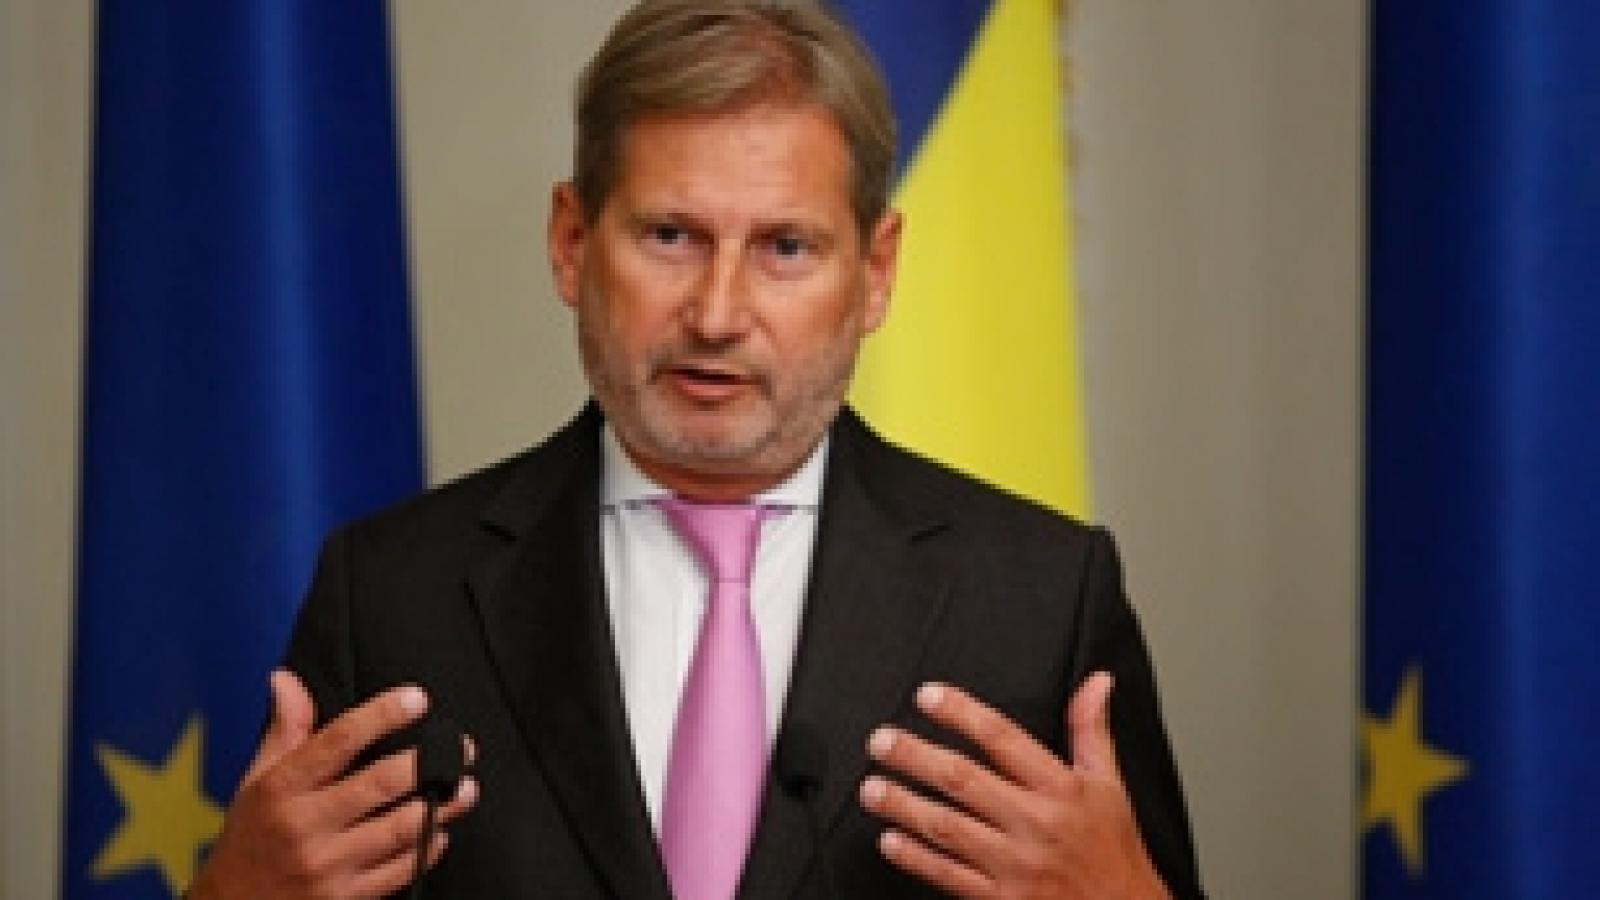 Commissioner Hahn visits Ukraine to discuss reform progress and reiterate EU support to civil society